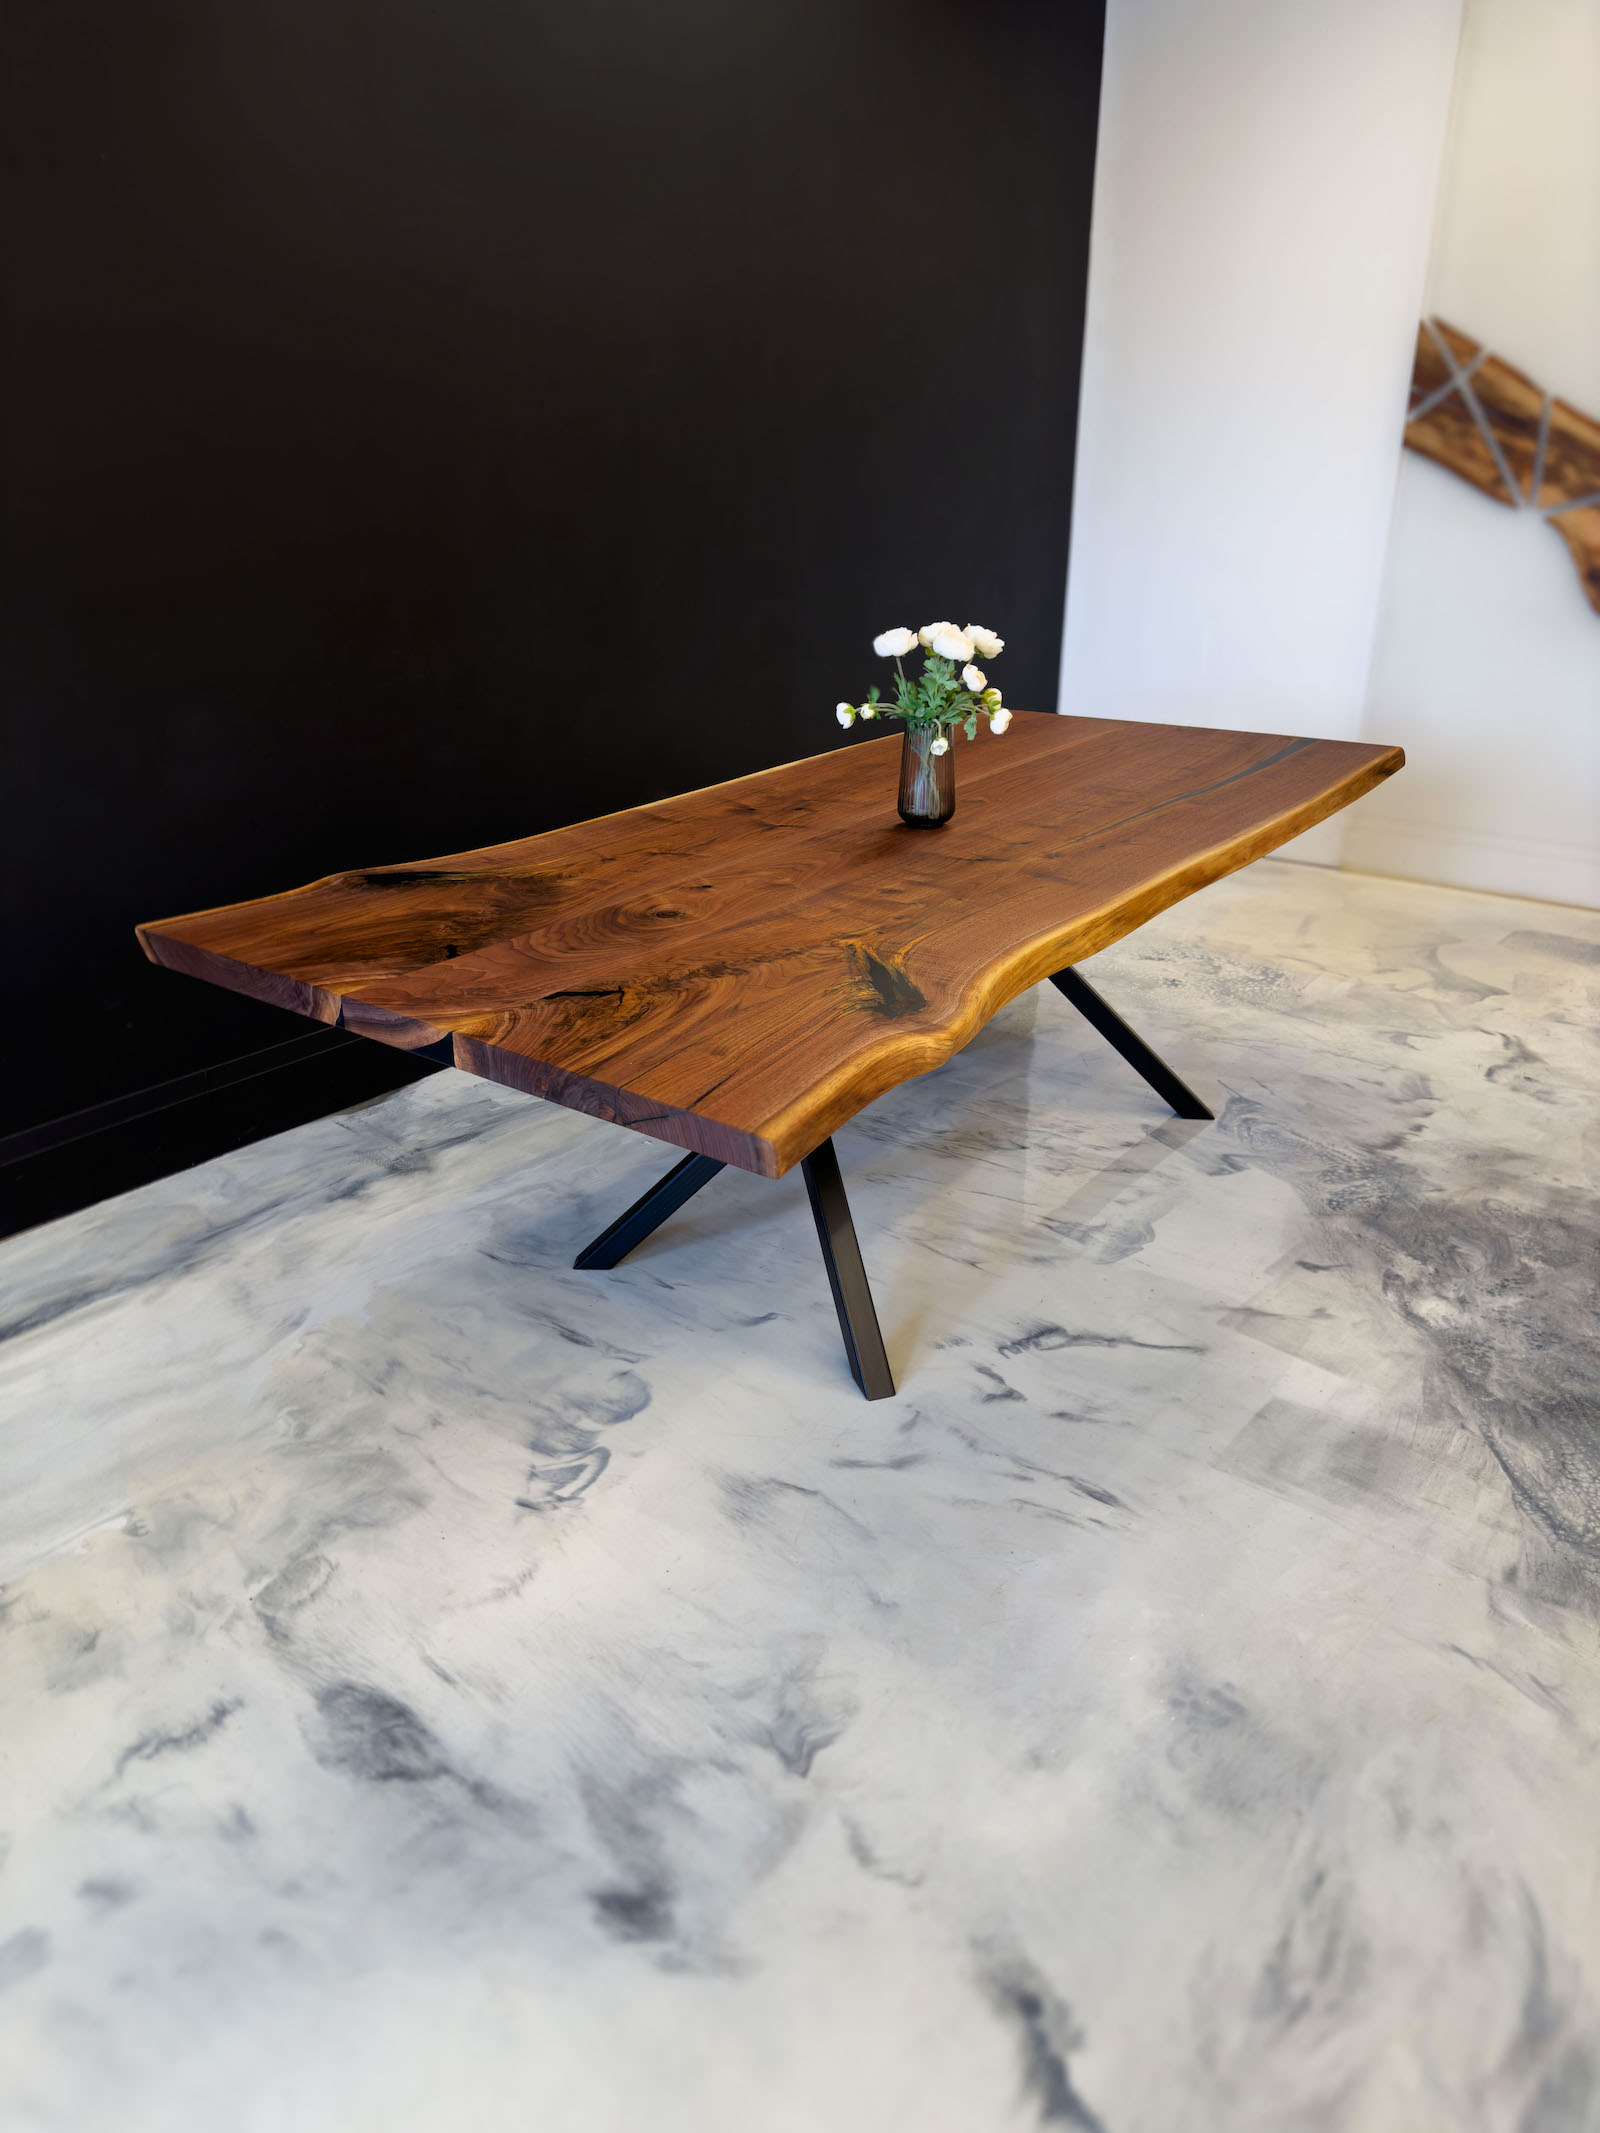 Dining Table Live Edge – All made of Walnut